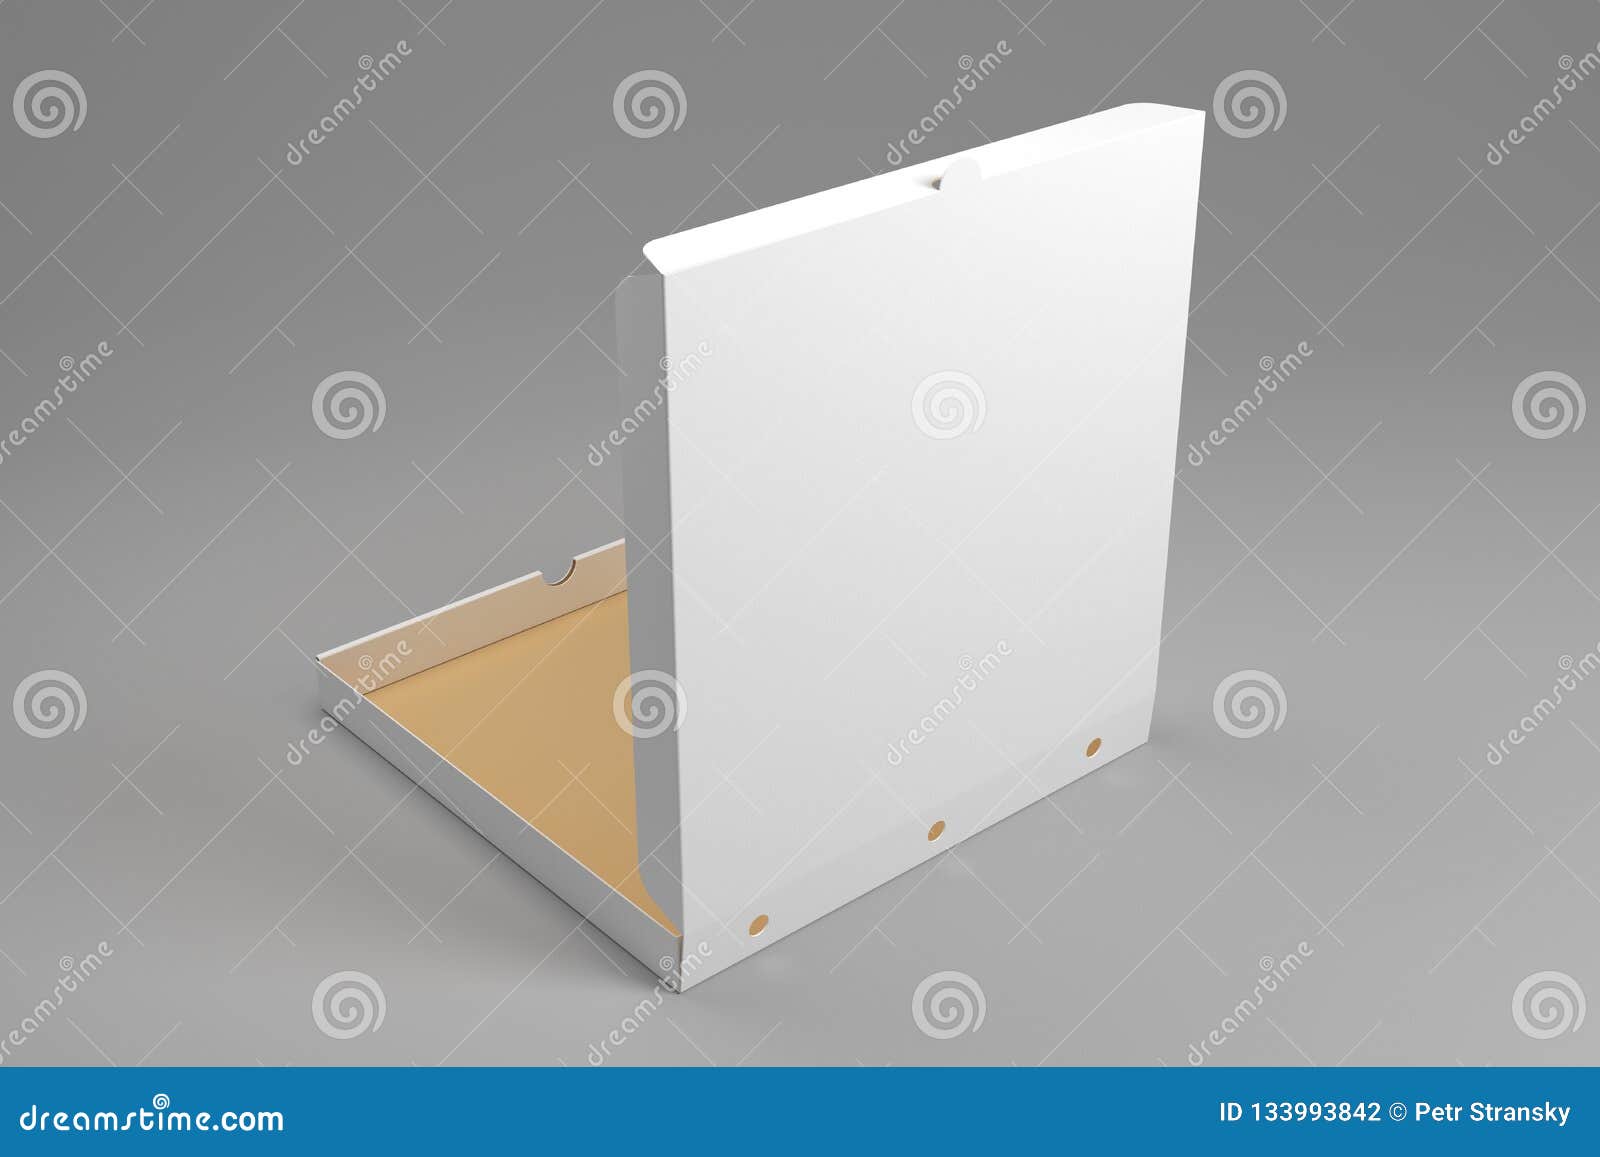 Download Empty Opened 3d Illustration Pizza Box Mockup. Stock ...